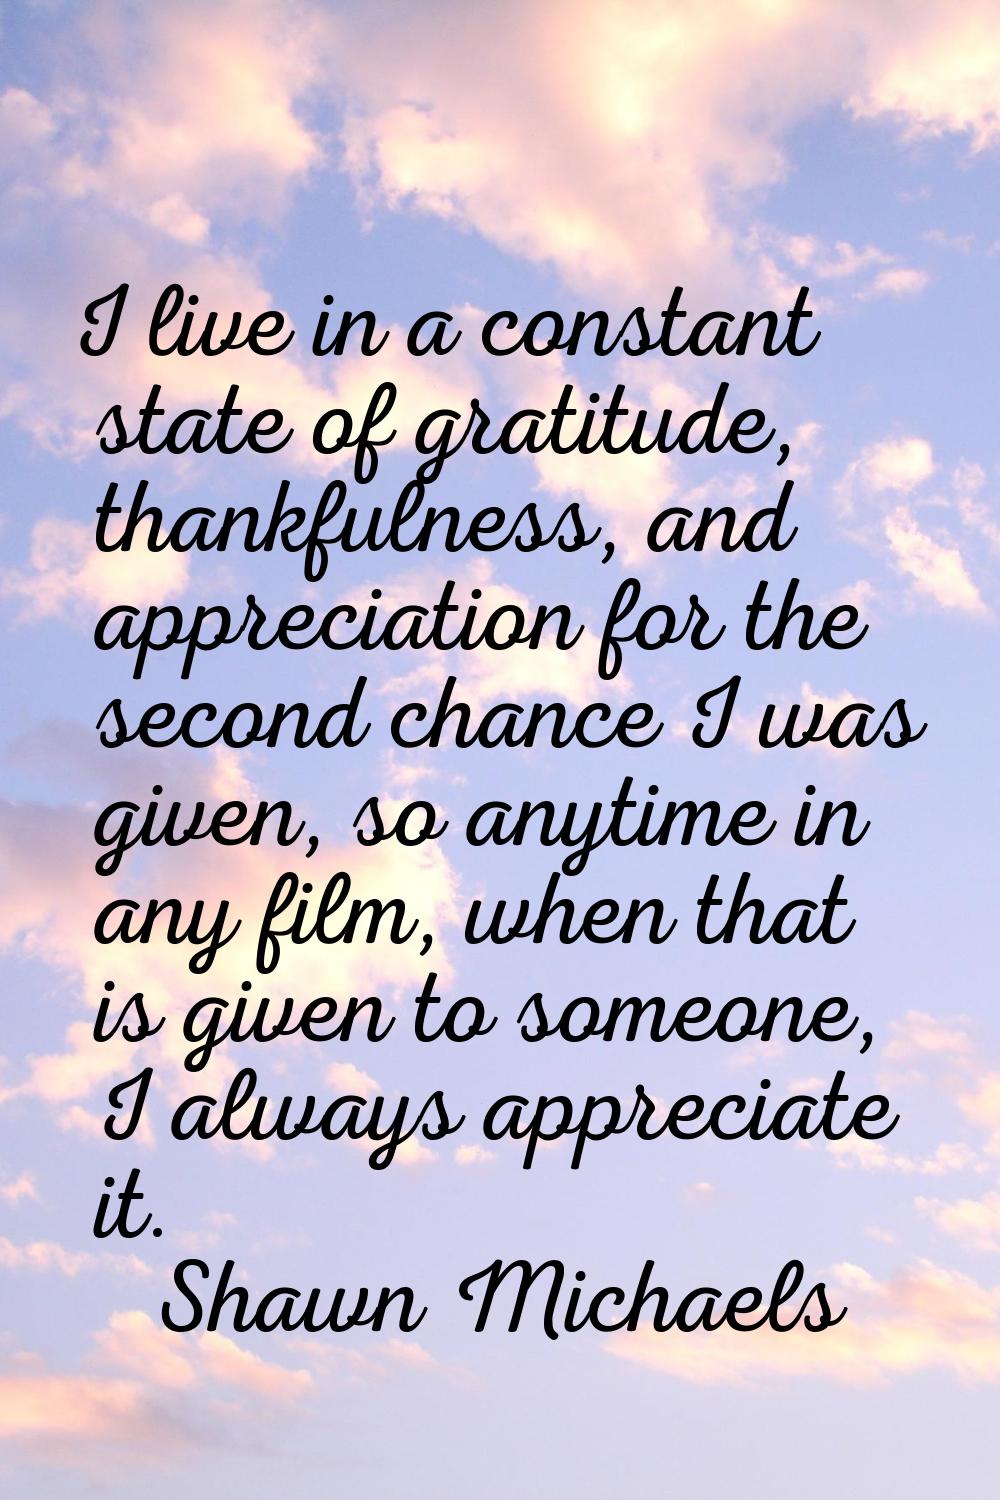 I live in a constant state of gratitude, thankfulness, and appreciation for the second chance I was